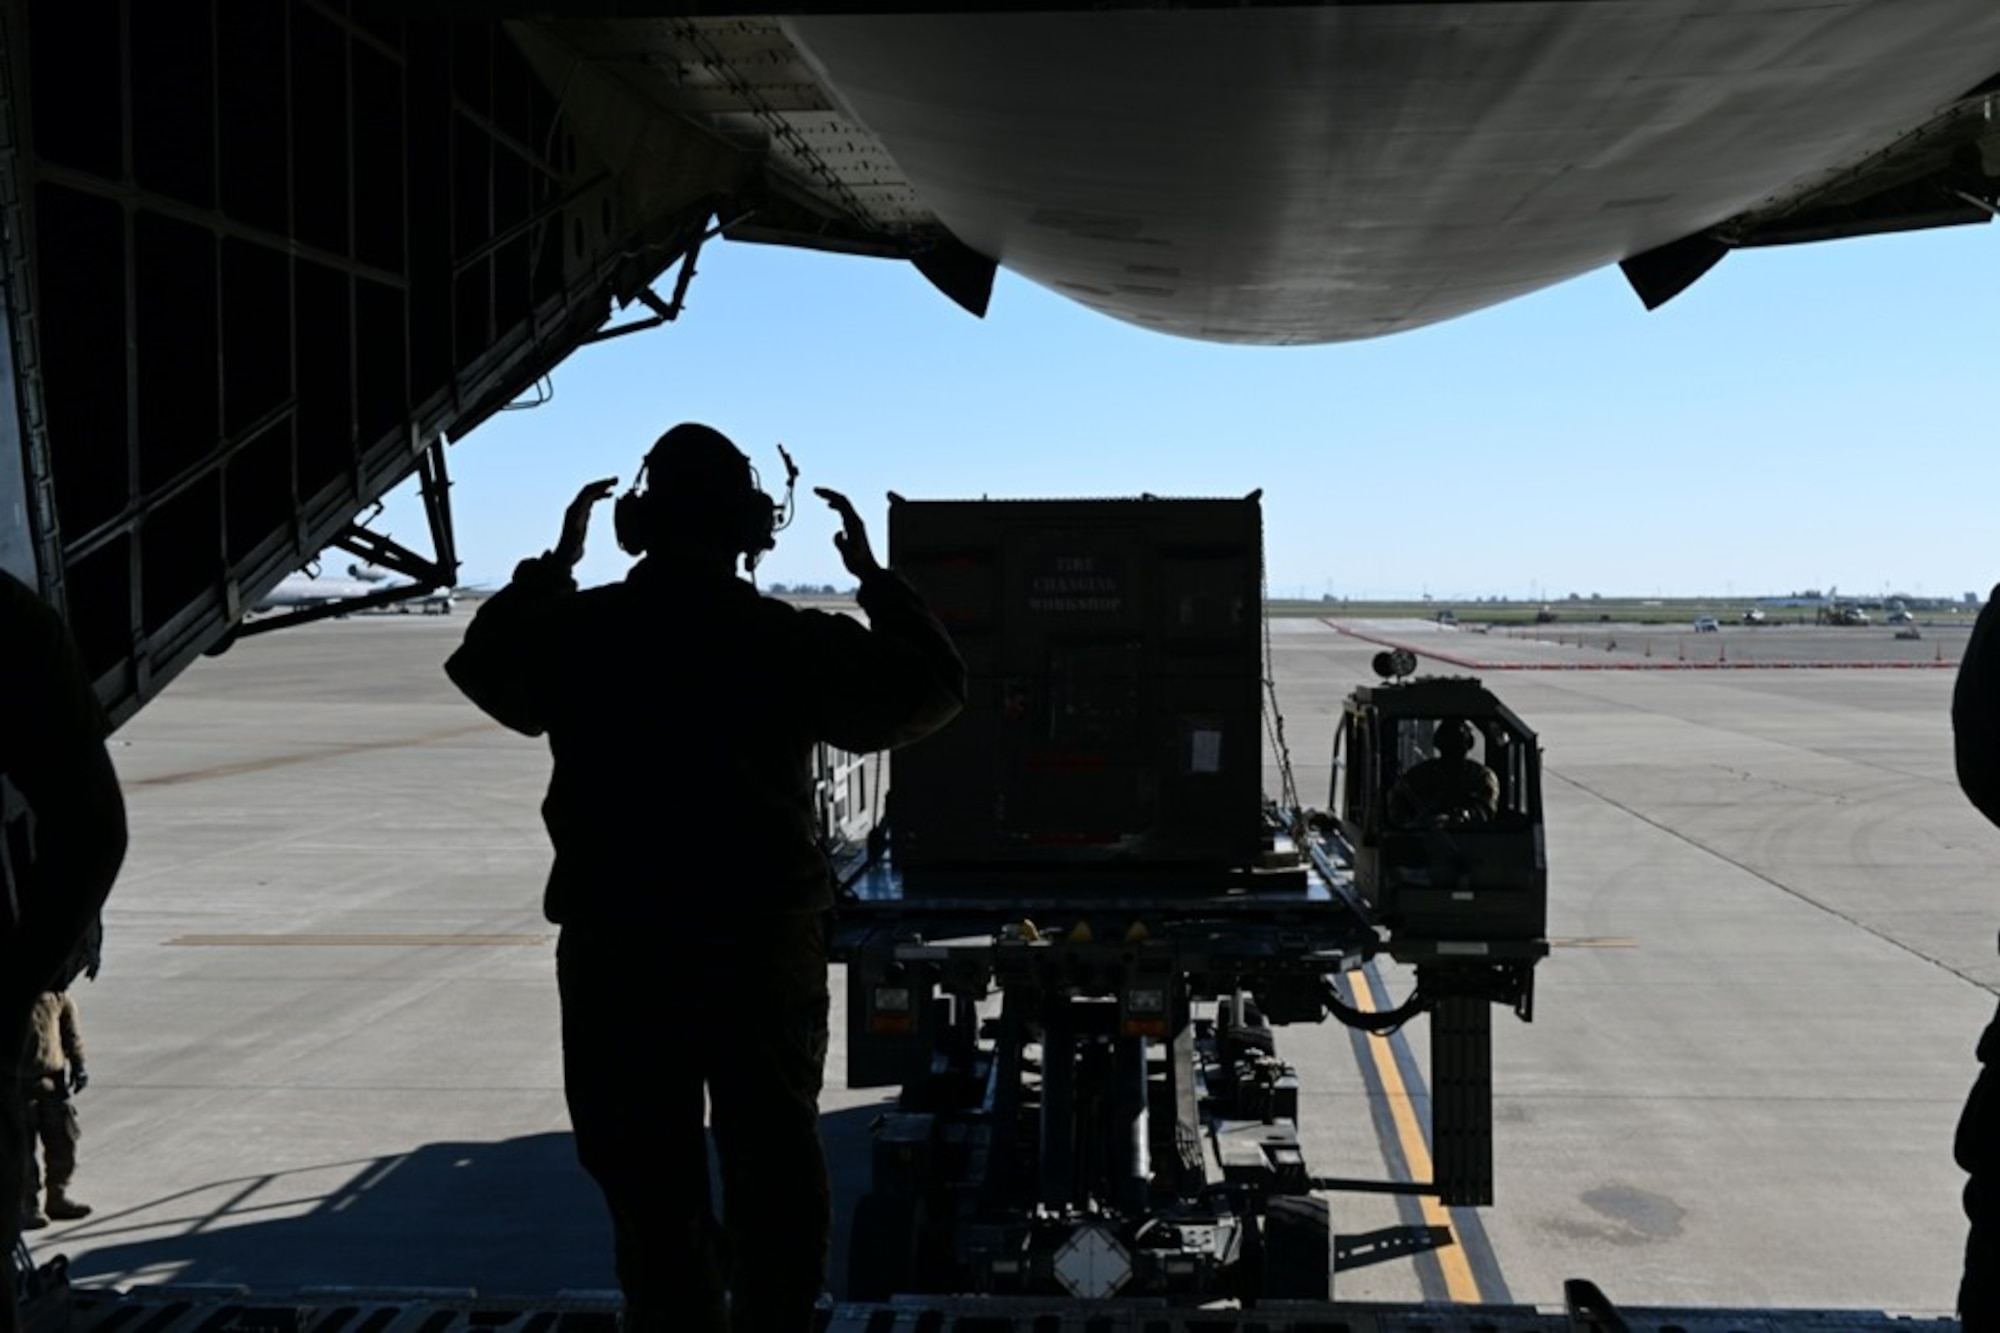 An Airman in a uniform and headset taxis in cargo into the gaping maw of a C-5M Super Galaxy